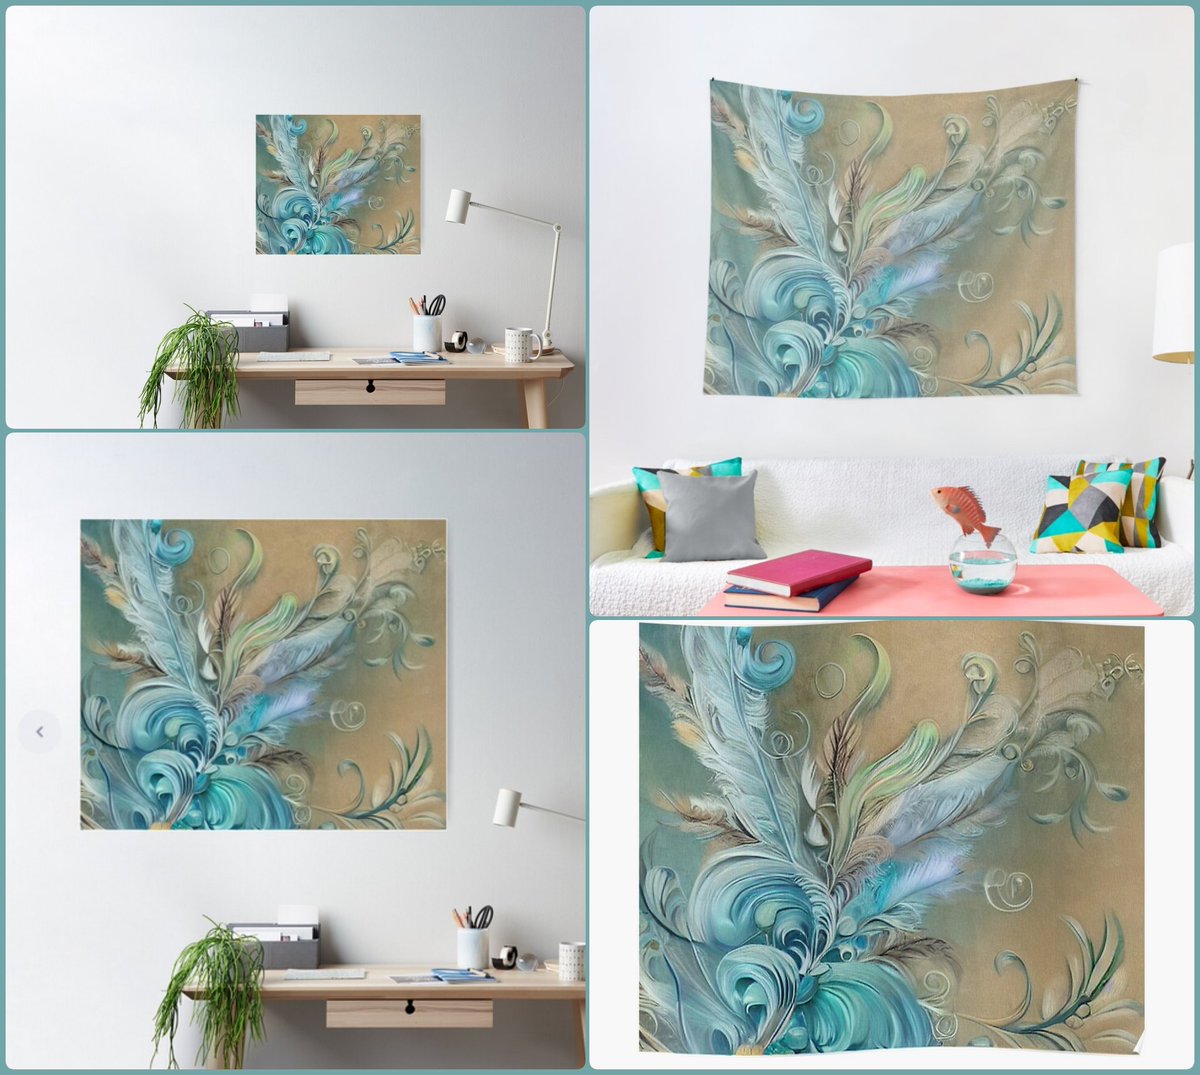 Blue Chiffon Poster~by Art Falaxy
~The Art of Uniqueness!~ #accents #wall #art #artfalaxy #canvas #framed #metal #posters #prints #redbubble #tapestry #wood #trendy #modern #FindYourThing #blue #gold #green

redbubble.com/i/poster/Blue-…